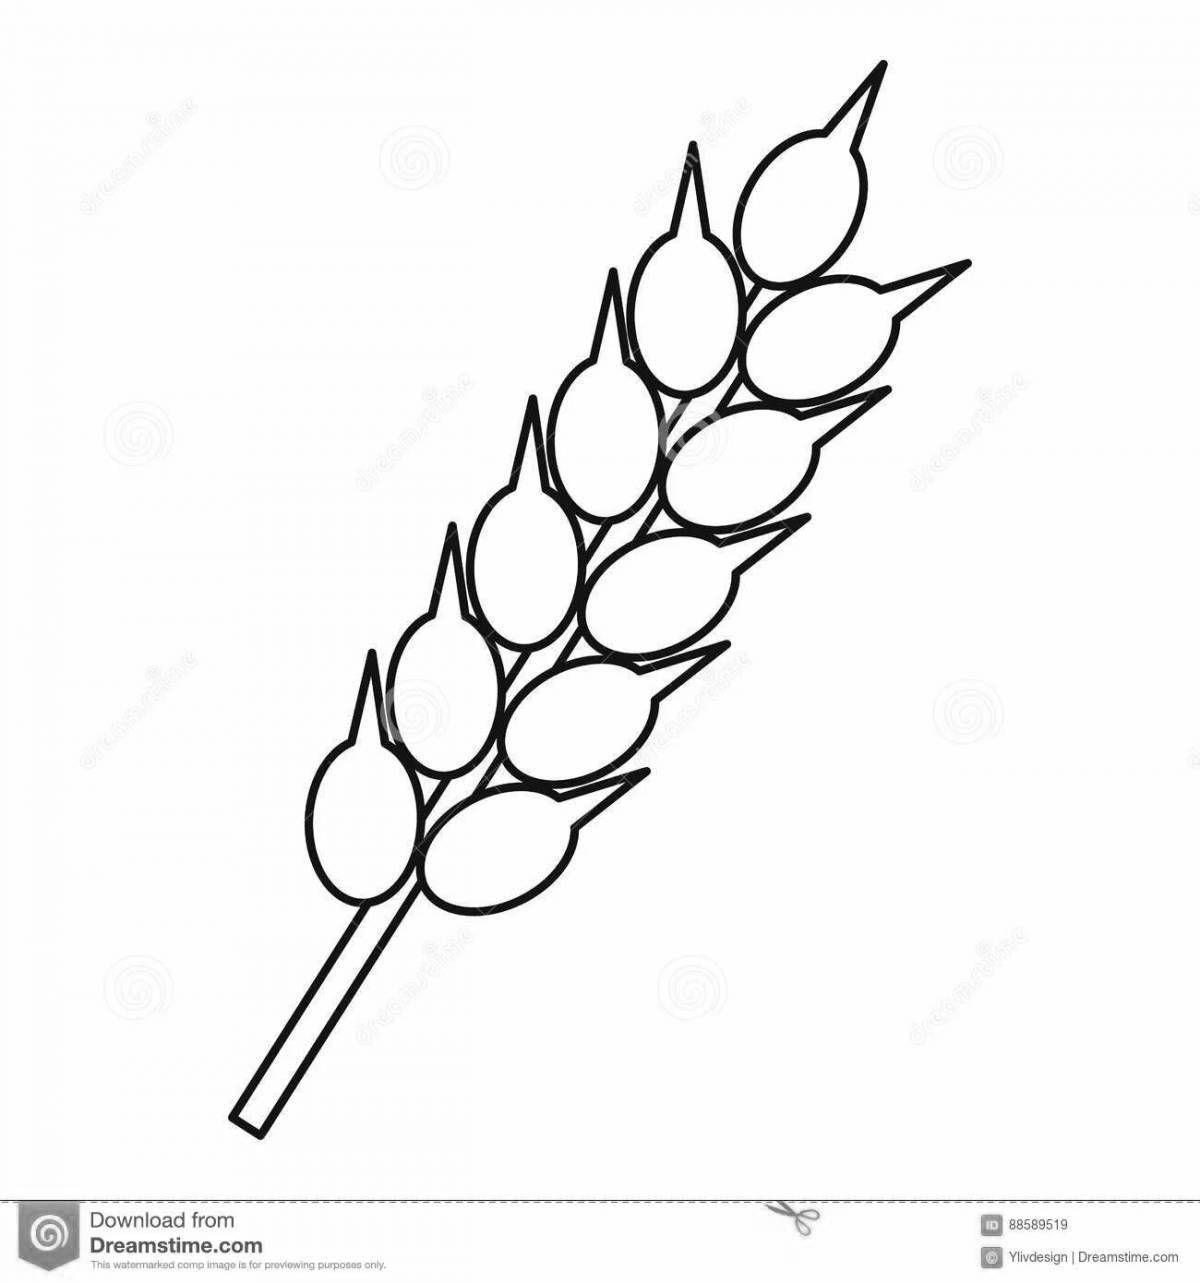 Funny spikelet coloring for kids